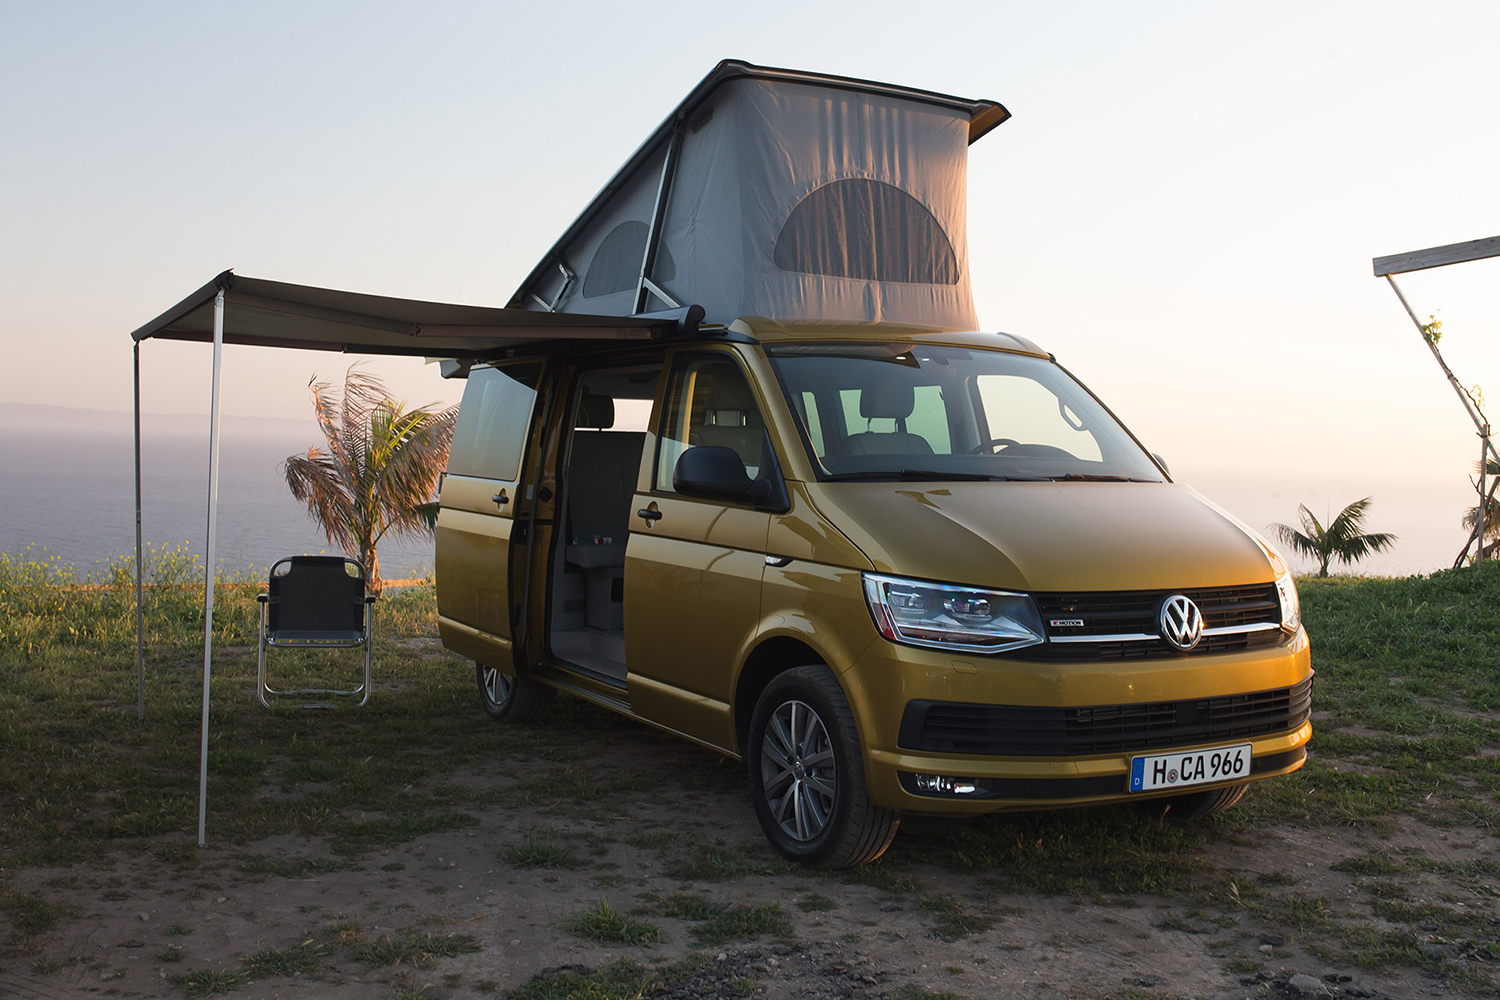 The history of the VW Transporter van